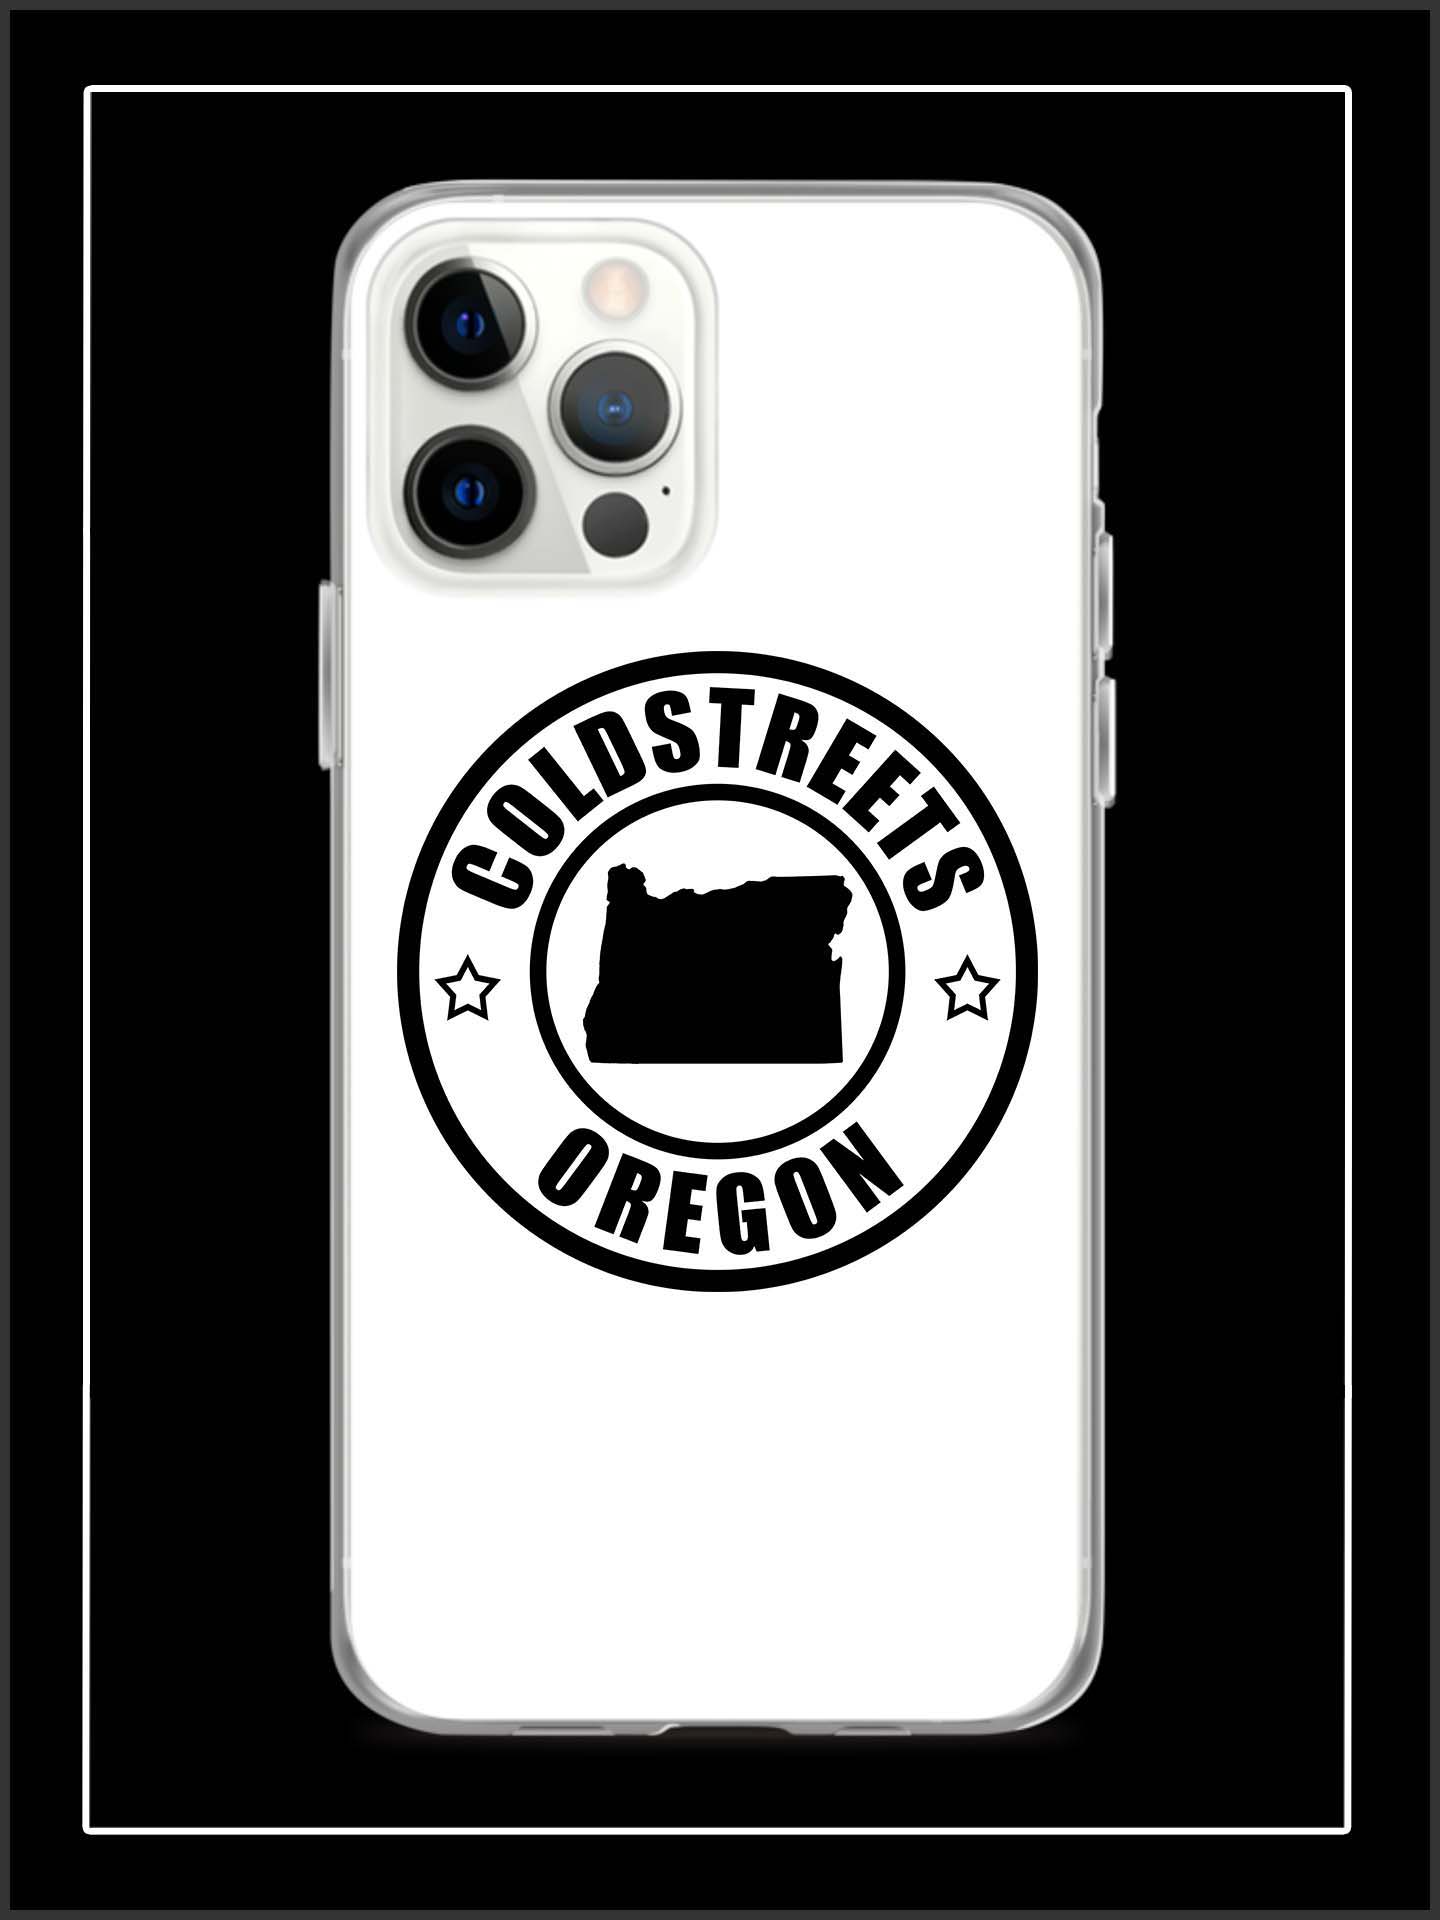 Cold Streets Oregon iPhone Cases